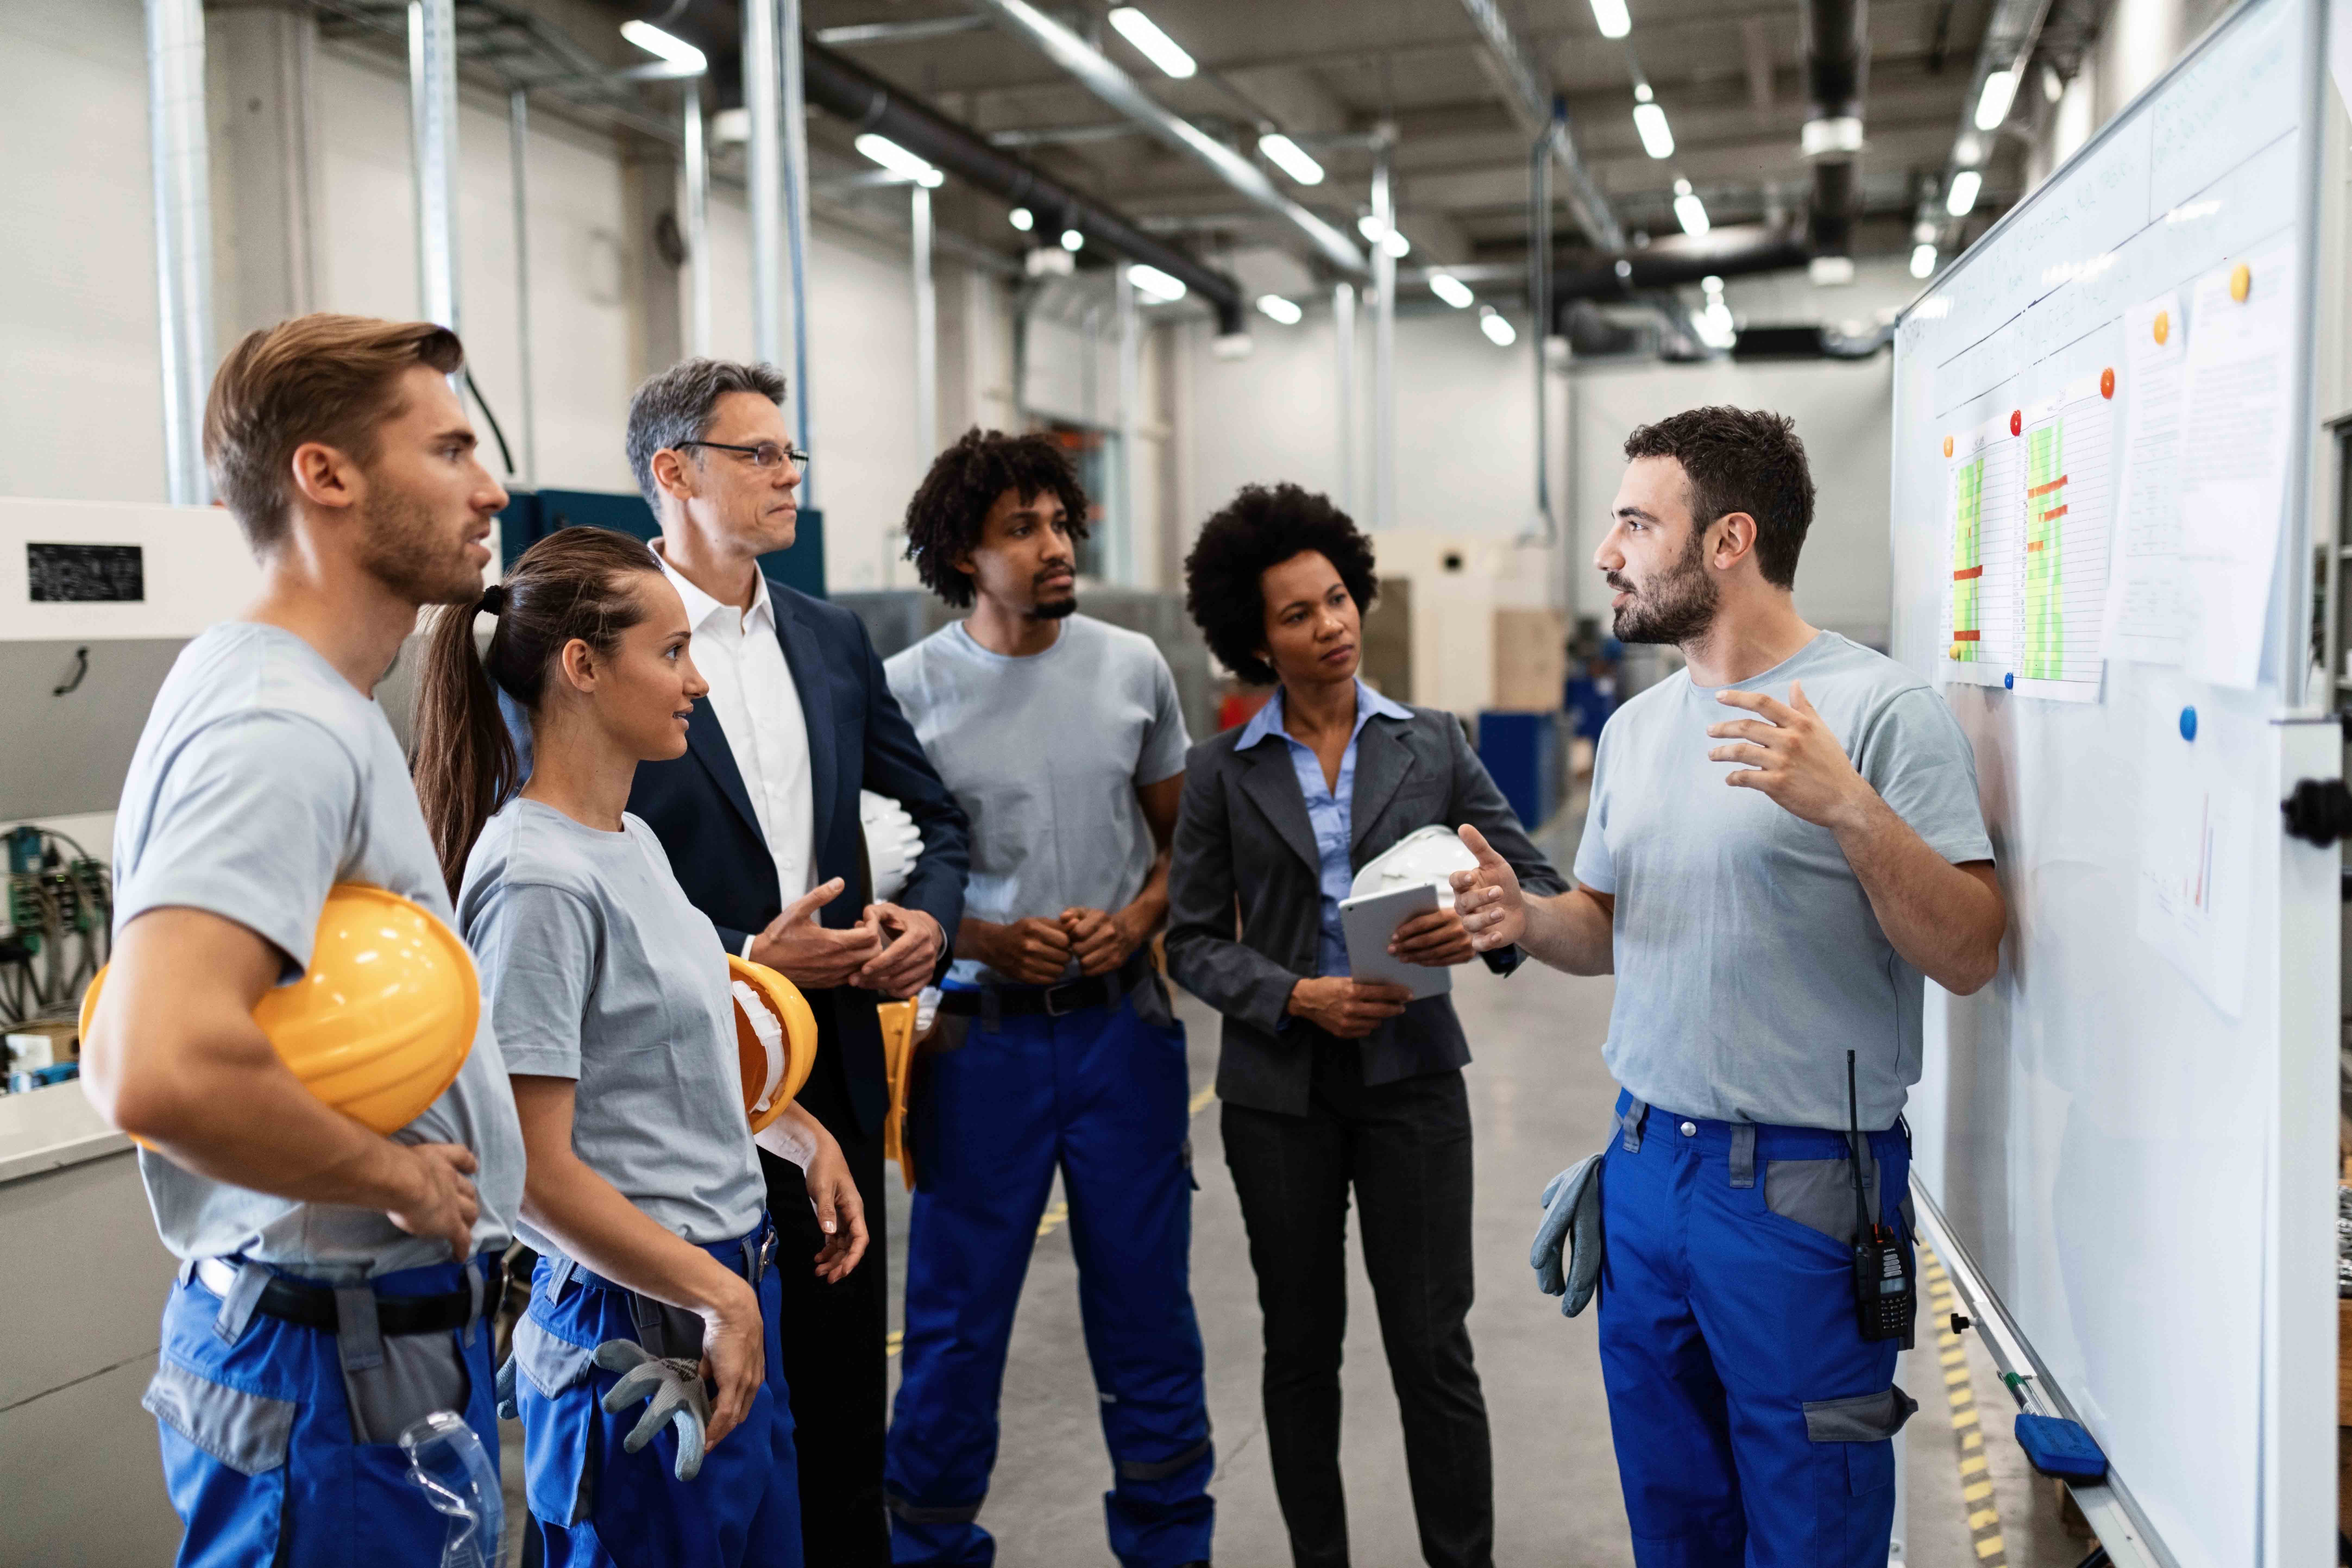 Manual worker communicating with company leaders and his coworkers during business presentation in a factory.